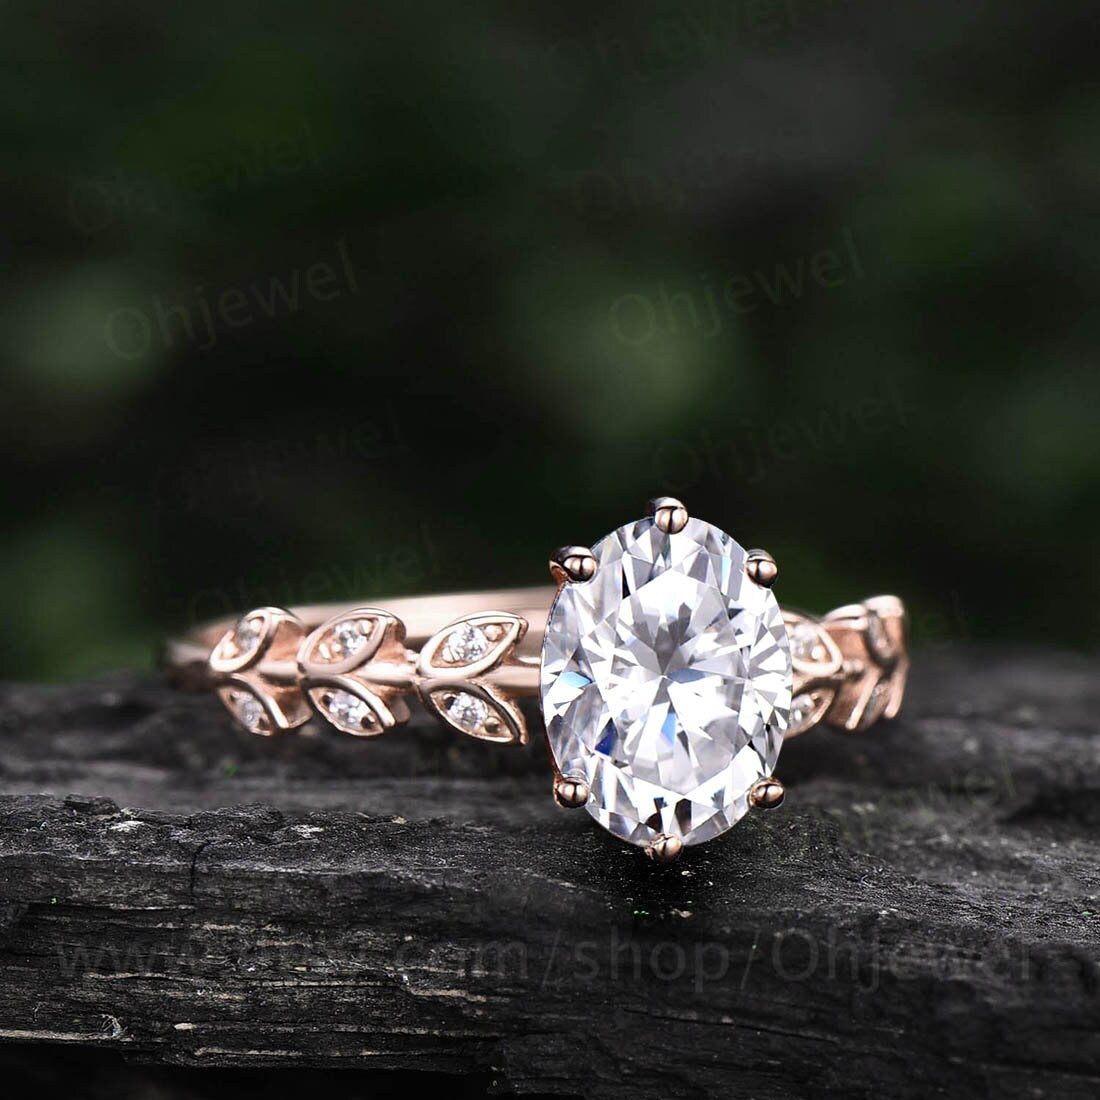 1.5ct oval cut Moissanite engagement ring solid 14k rose gold branches leaf Leaves twig nature inspired unique diamond wedding ring women